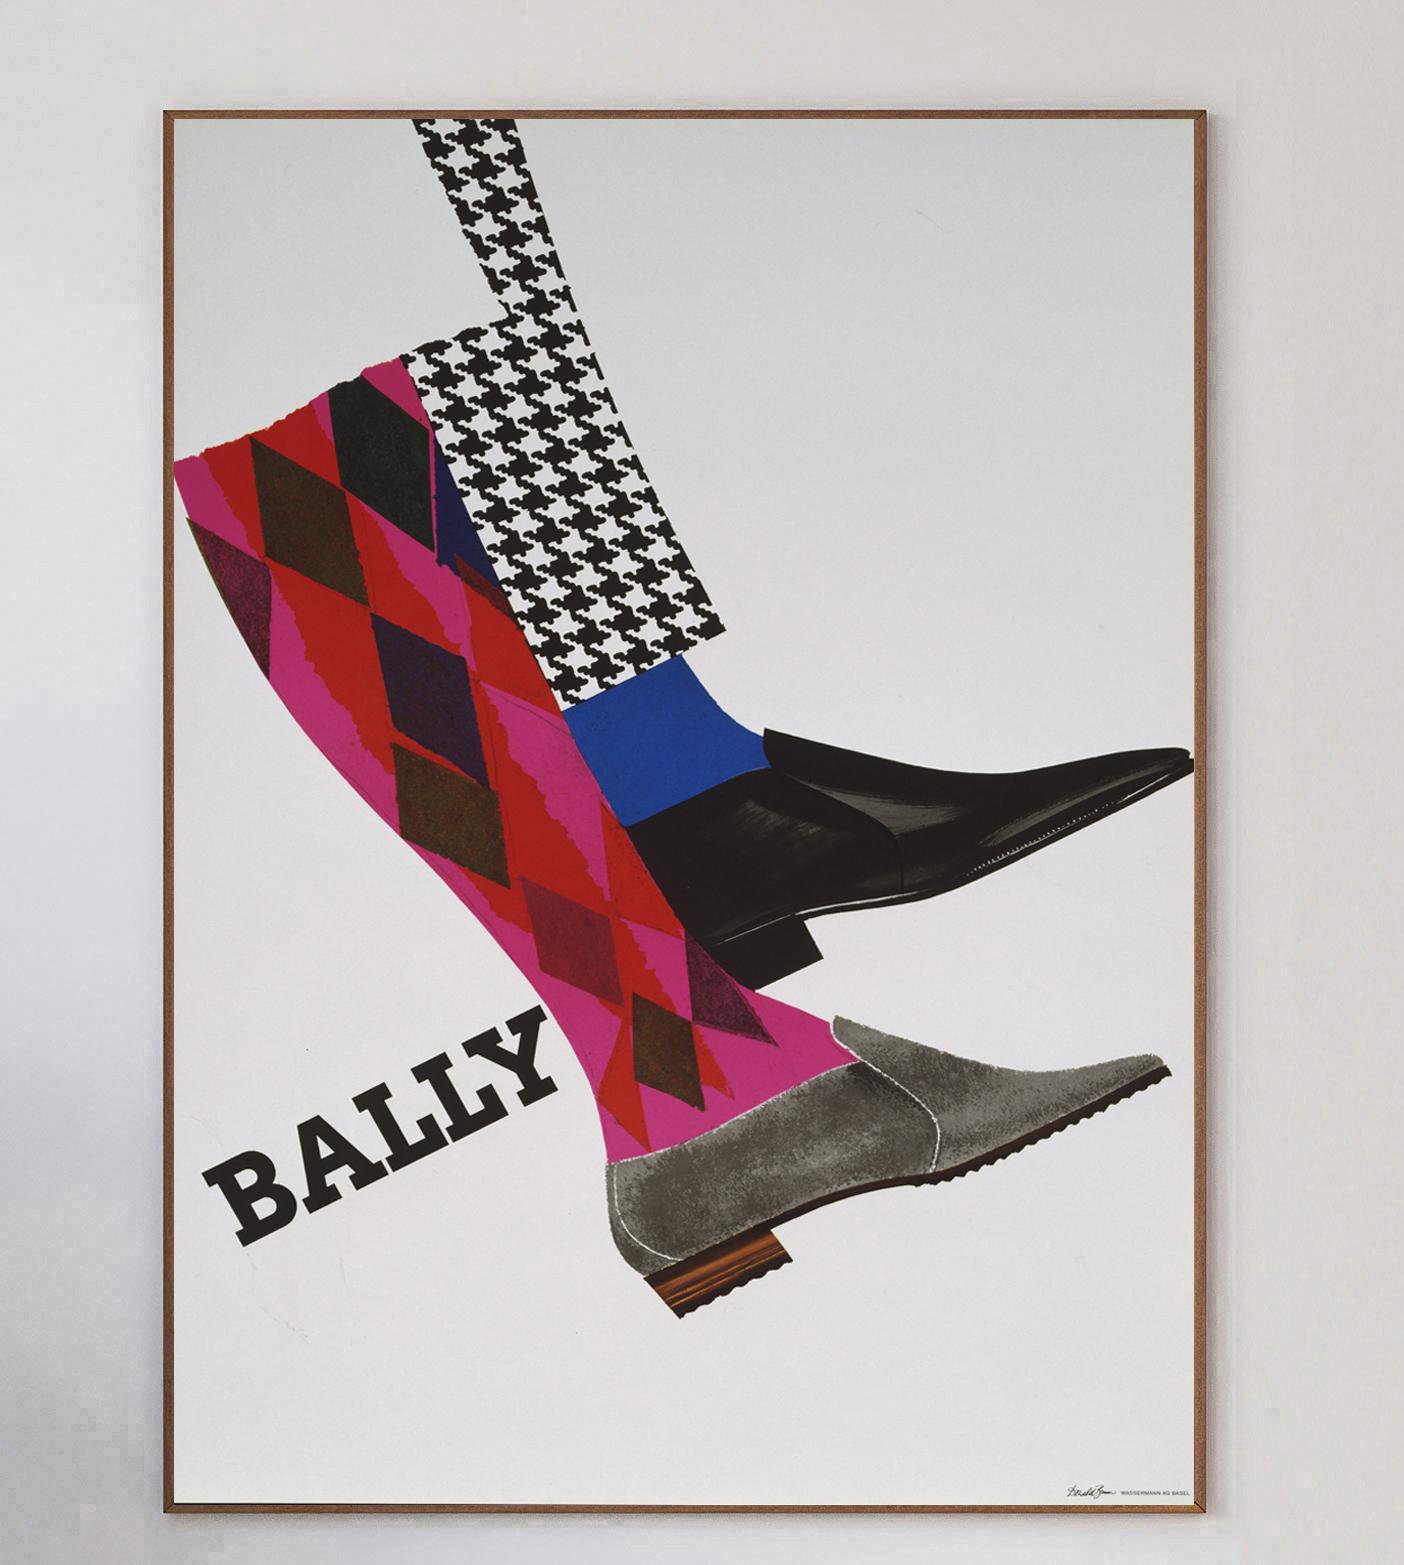 One of the most iconic and sought after designs of the 20th Century, the poster designs of Bally showcase the crossover between advertisement and fine art.

The luxury Swiss shoemaker worked with a range of esteemed poster artists such as Bernard